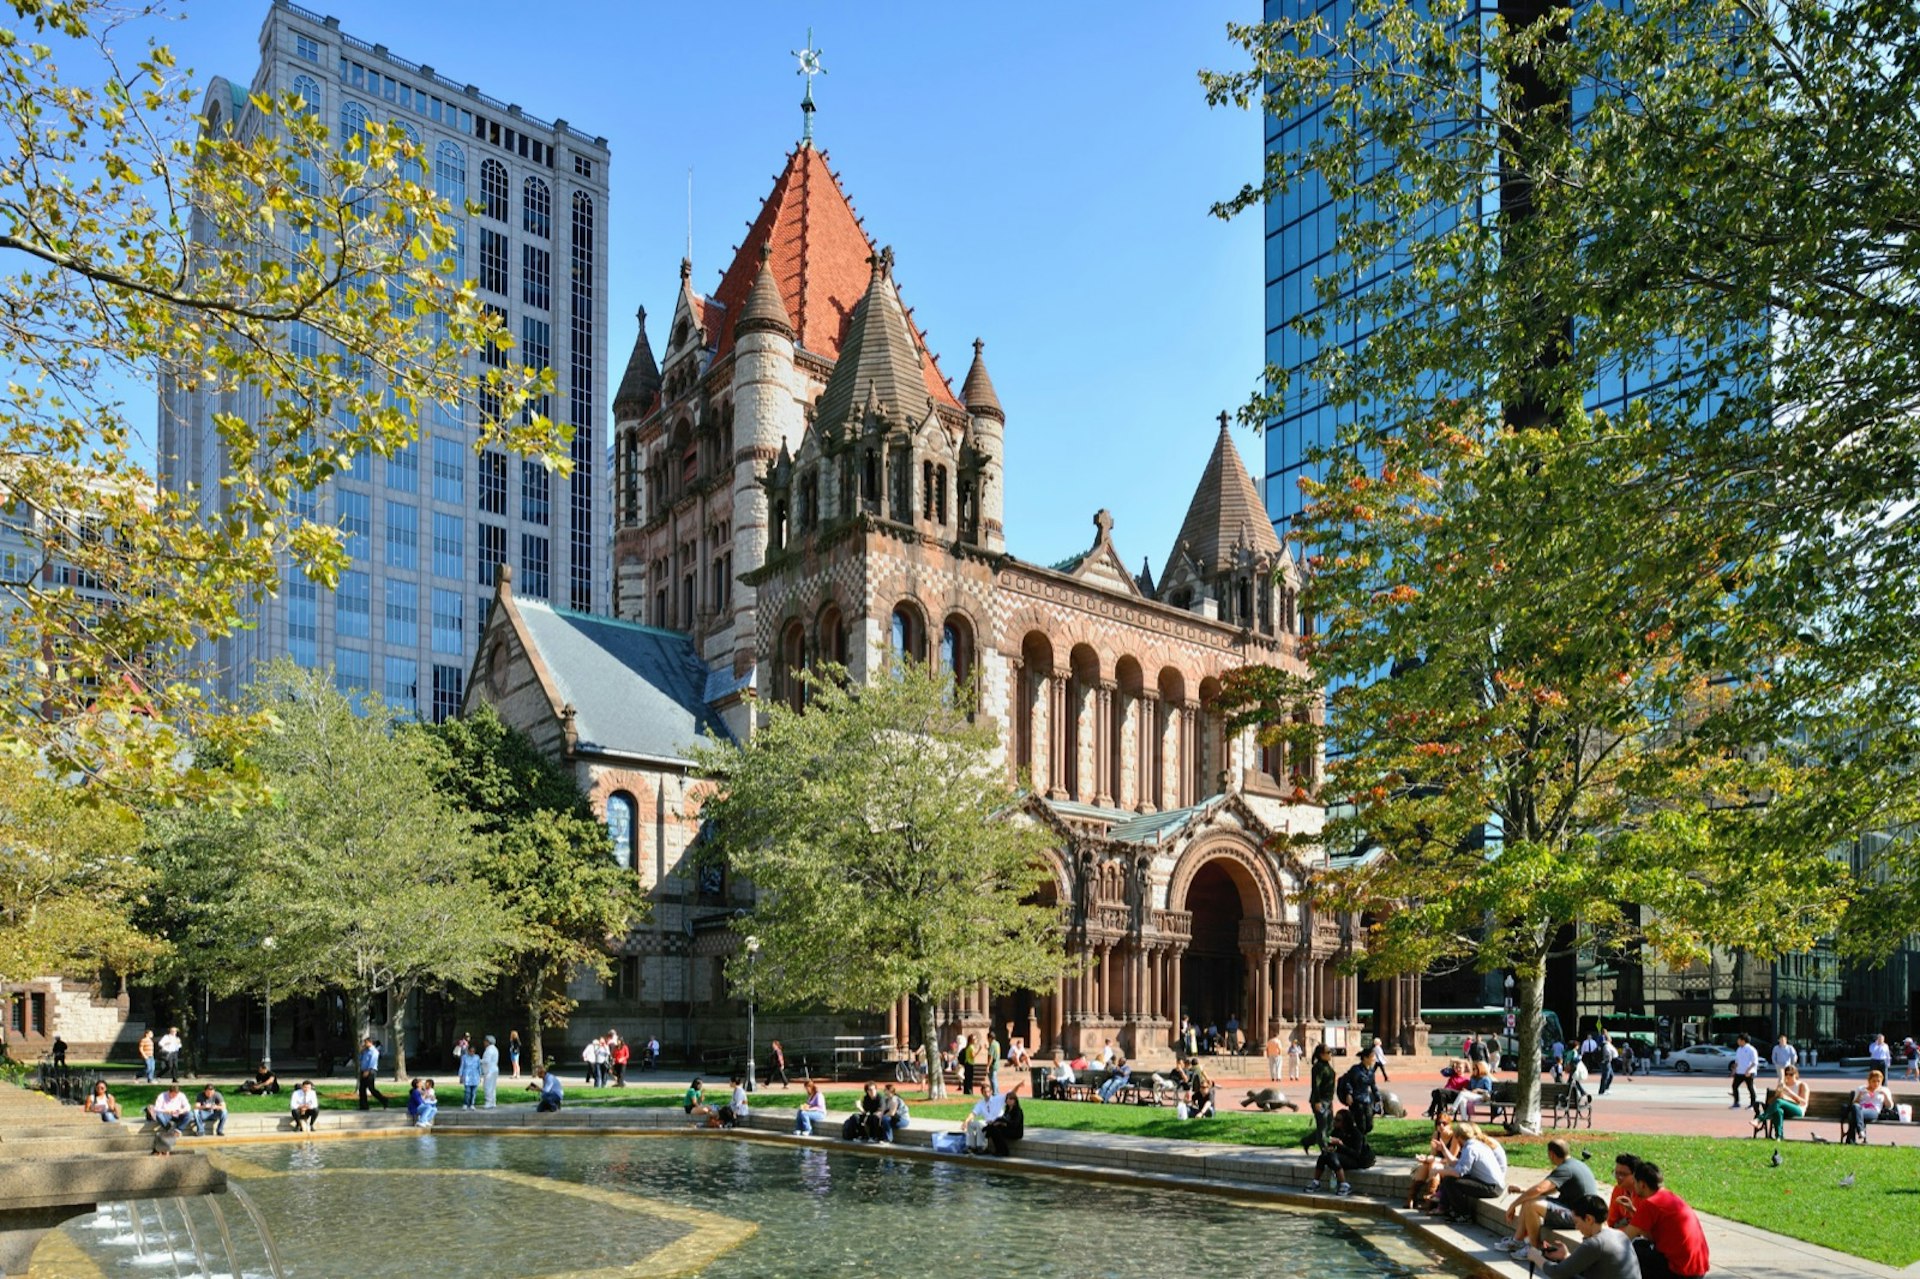 A group of people sit around a fountain and in front of Trinity Church on a sunny day in Boston